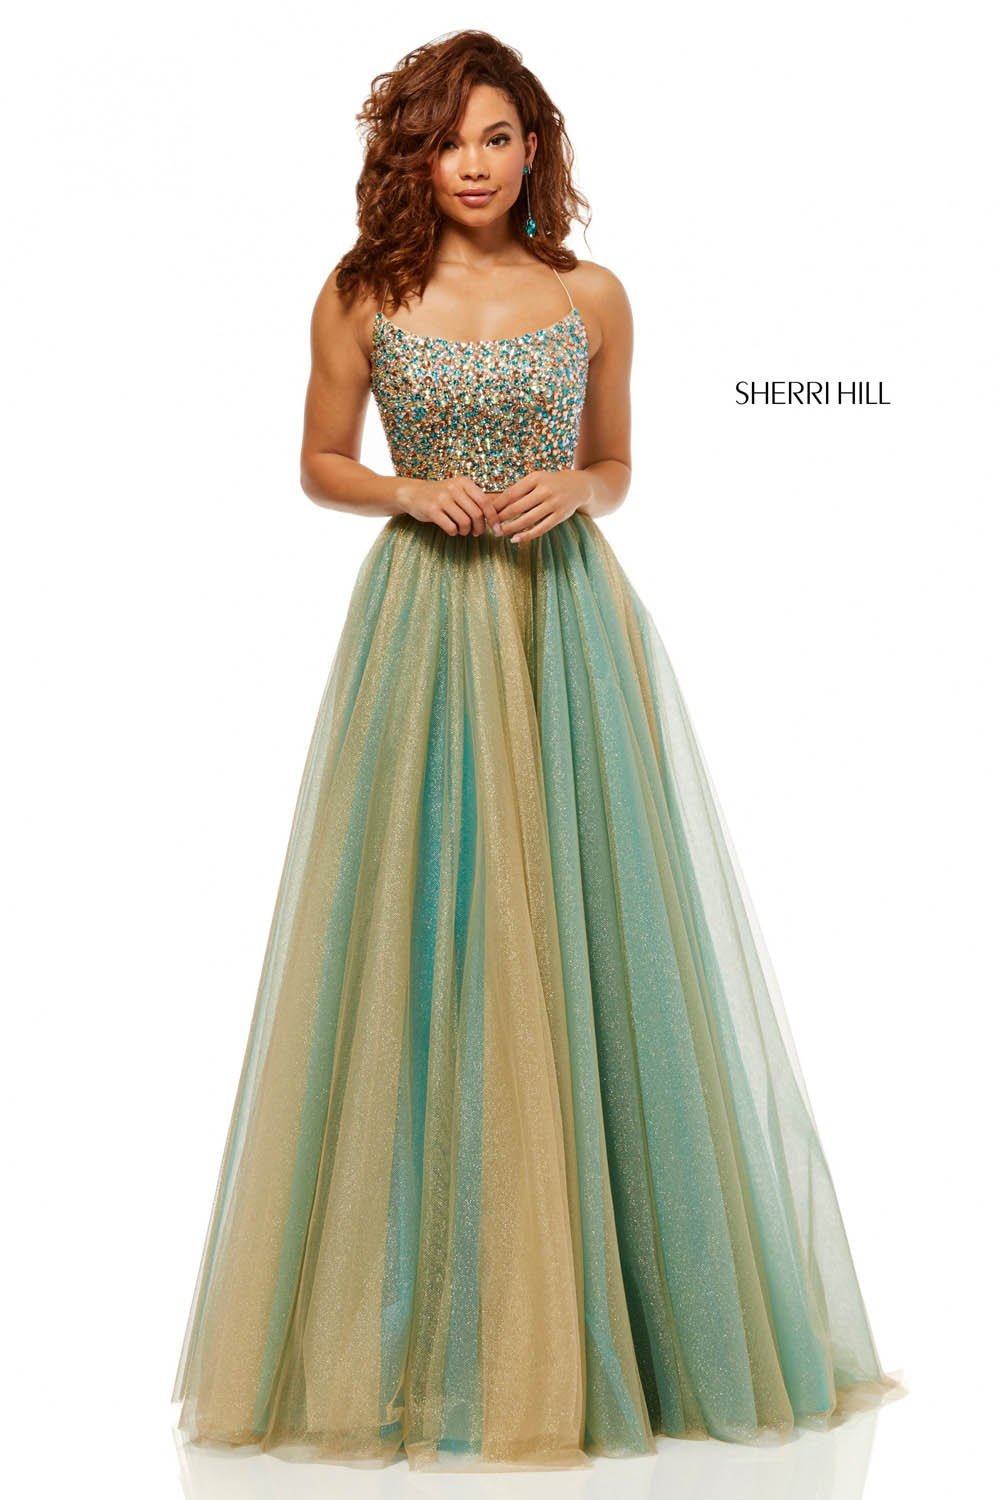 Sherri Hill 52404 dress images in these colors: Gold Turq.